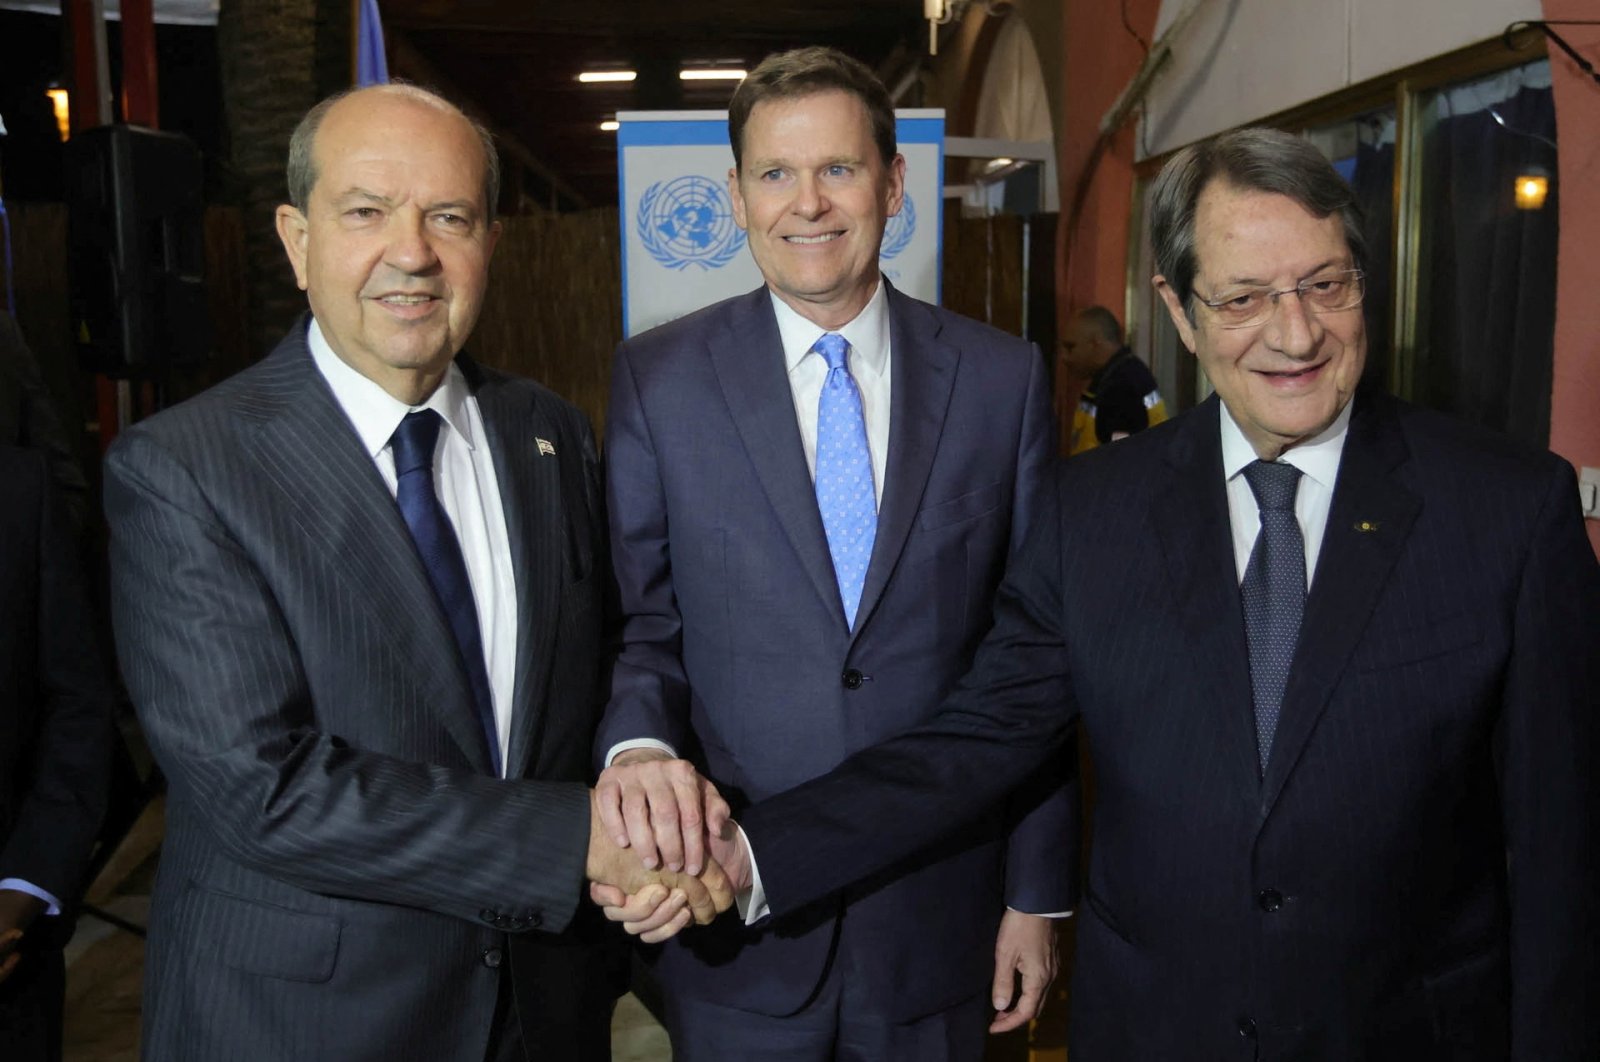 Special representative of the U.N. secretary-general and head of the UNFICYP, Colin Stewart (C), shakes hands with Greek Cypriot President Nicos Anastasiades (R) and Turkish Cypriot leader Ersin Tatar (L) during a reception at Ledra Palace in Lefkoşa (Nicosia), TRNC, Dec. 7, 2022. (Reuters Photo)